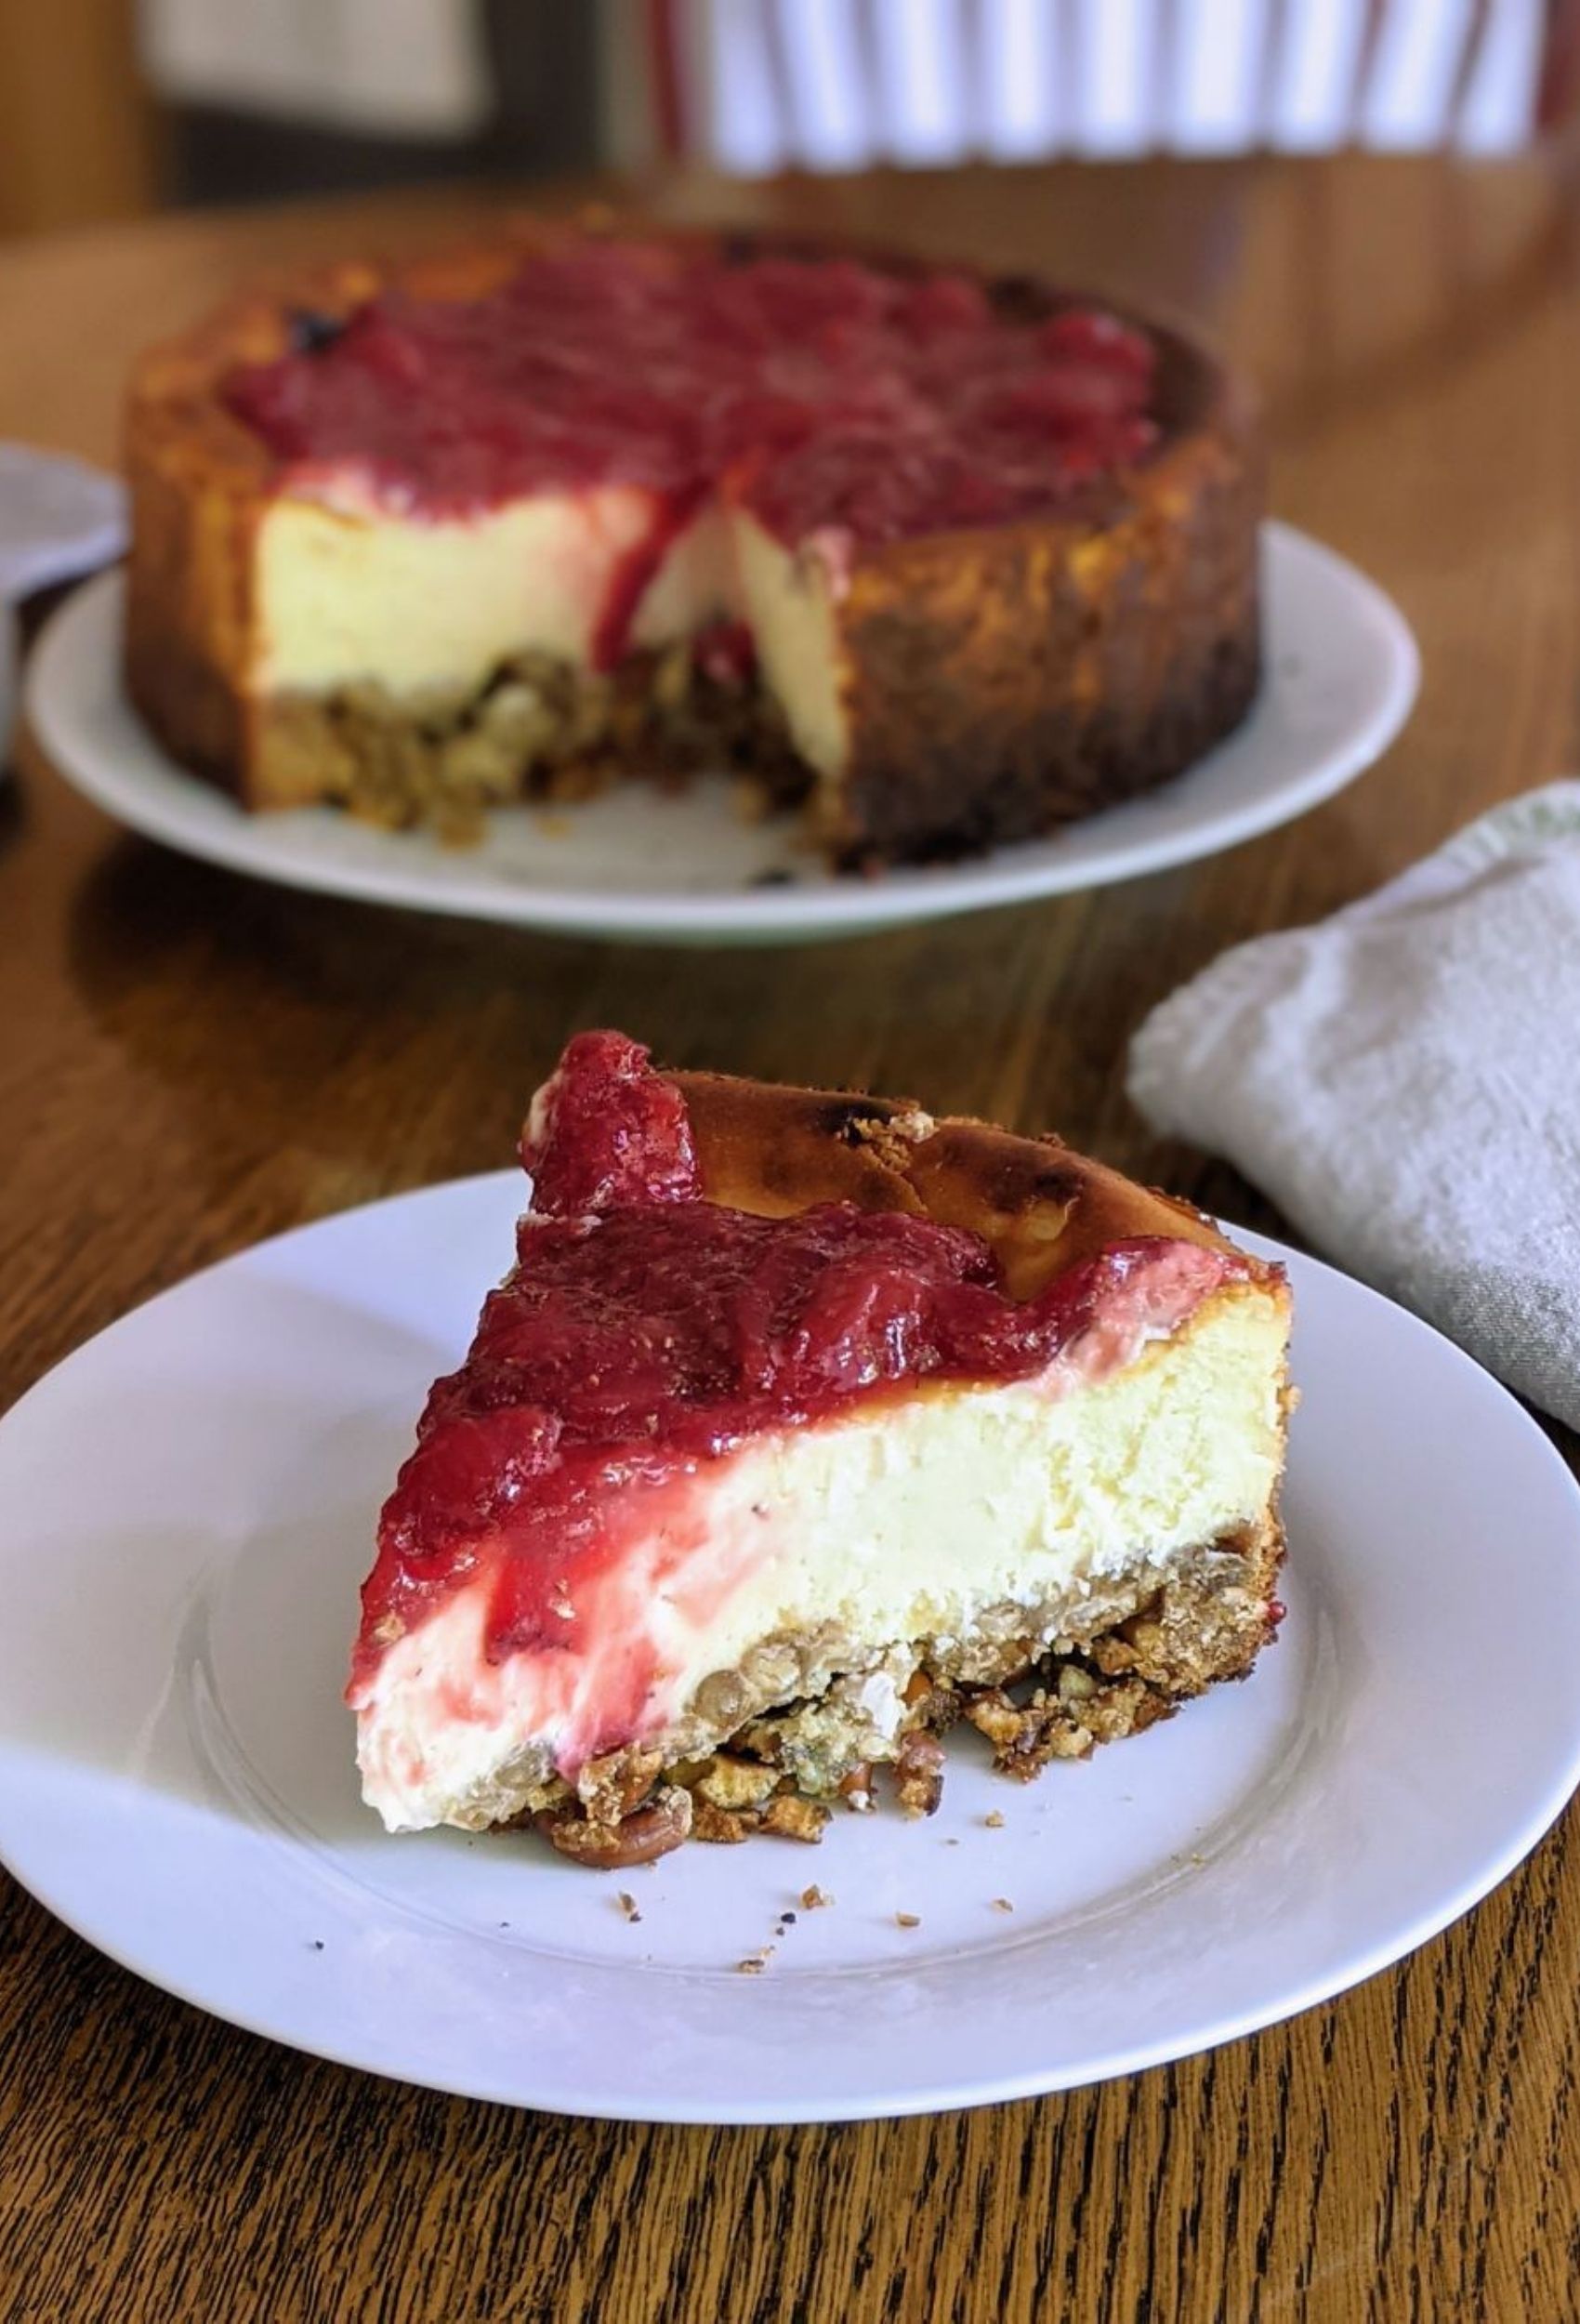 Slice of strawberry cheesecake with a pretzel crust, with full cheesecake in the background.